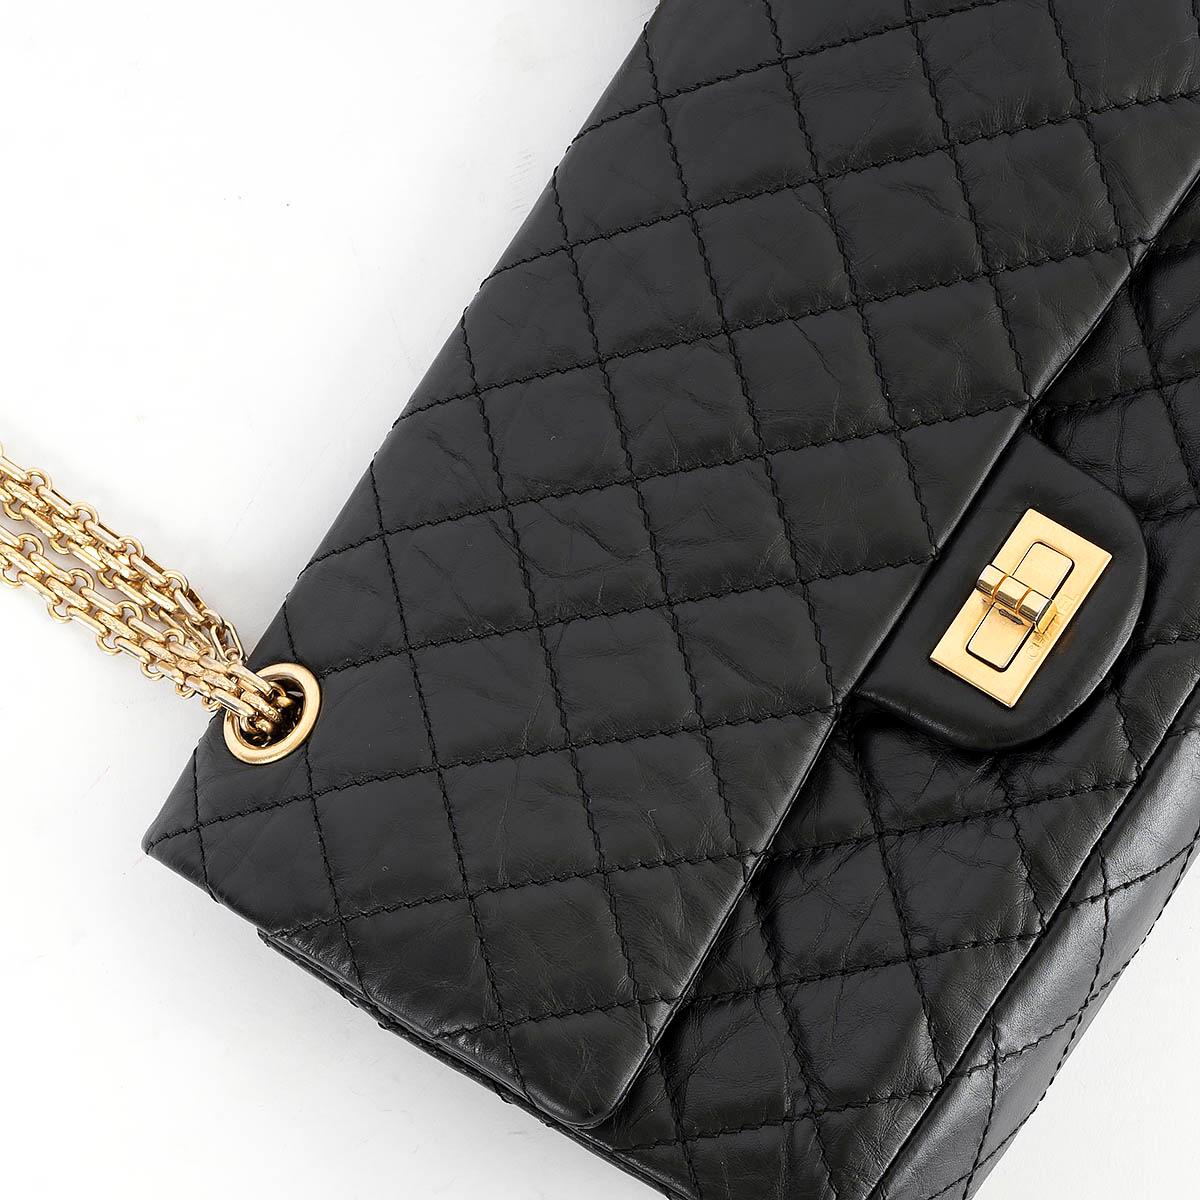 Women's CHANEL black quilted aged leather 2.55 REISSUE 225 MEDIUM Shoulder Bag For Sale